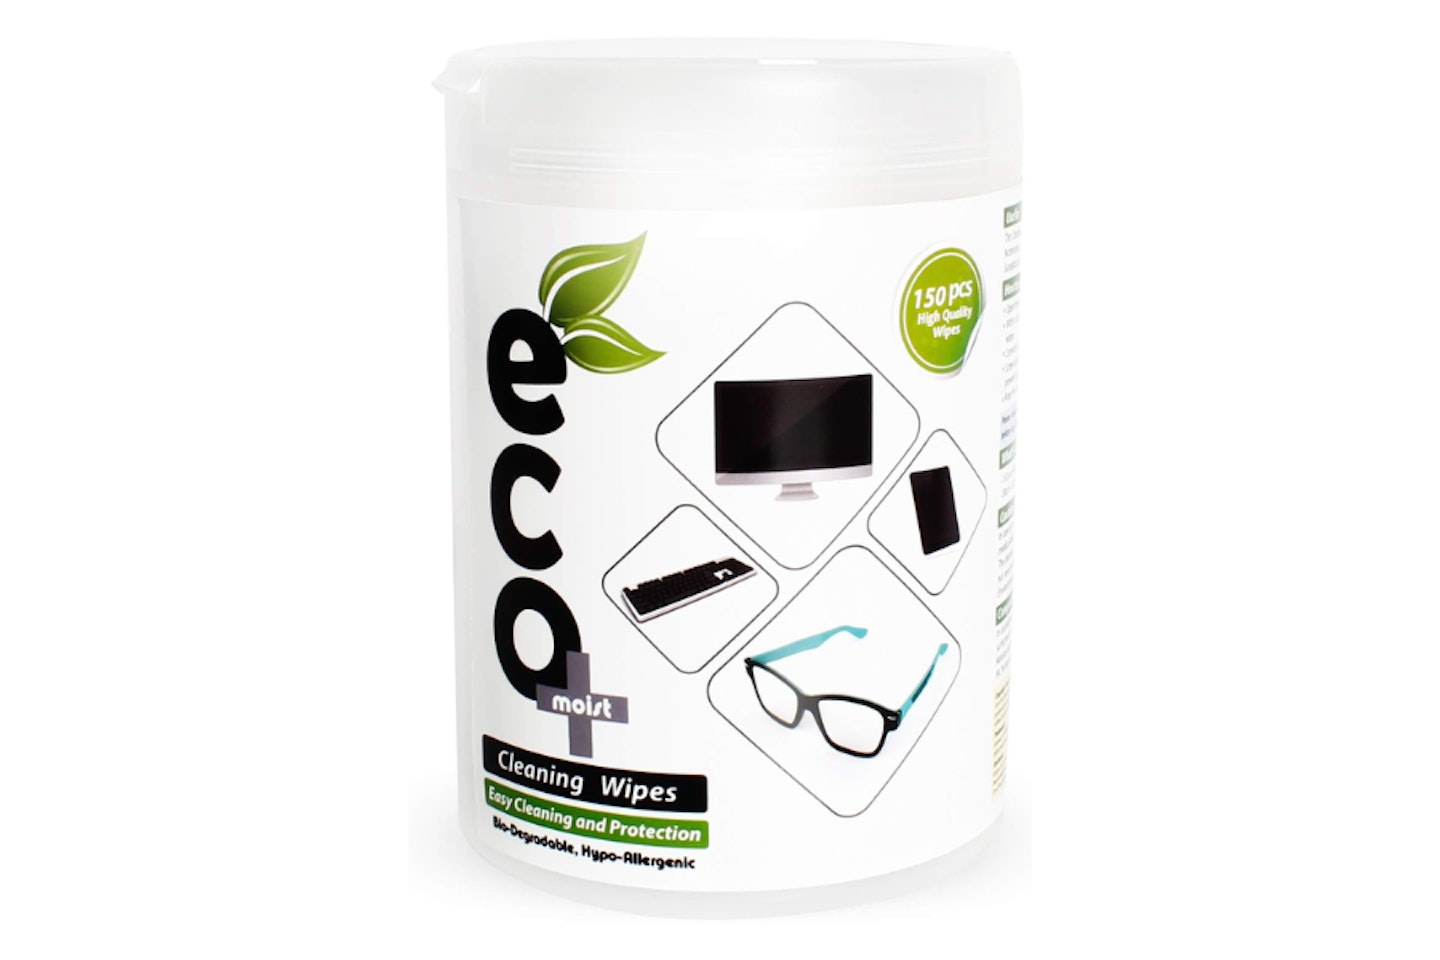 Ecomoist Cleaning Wipes - one of the best TV screen cleaner products